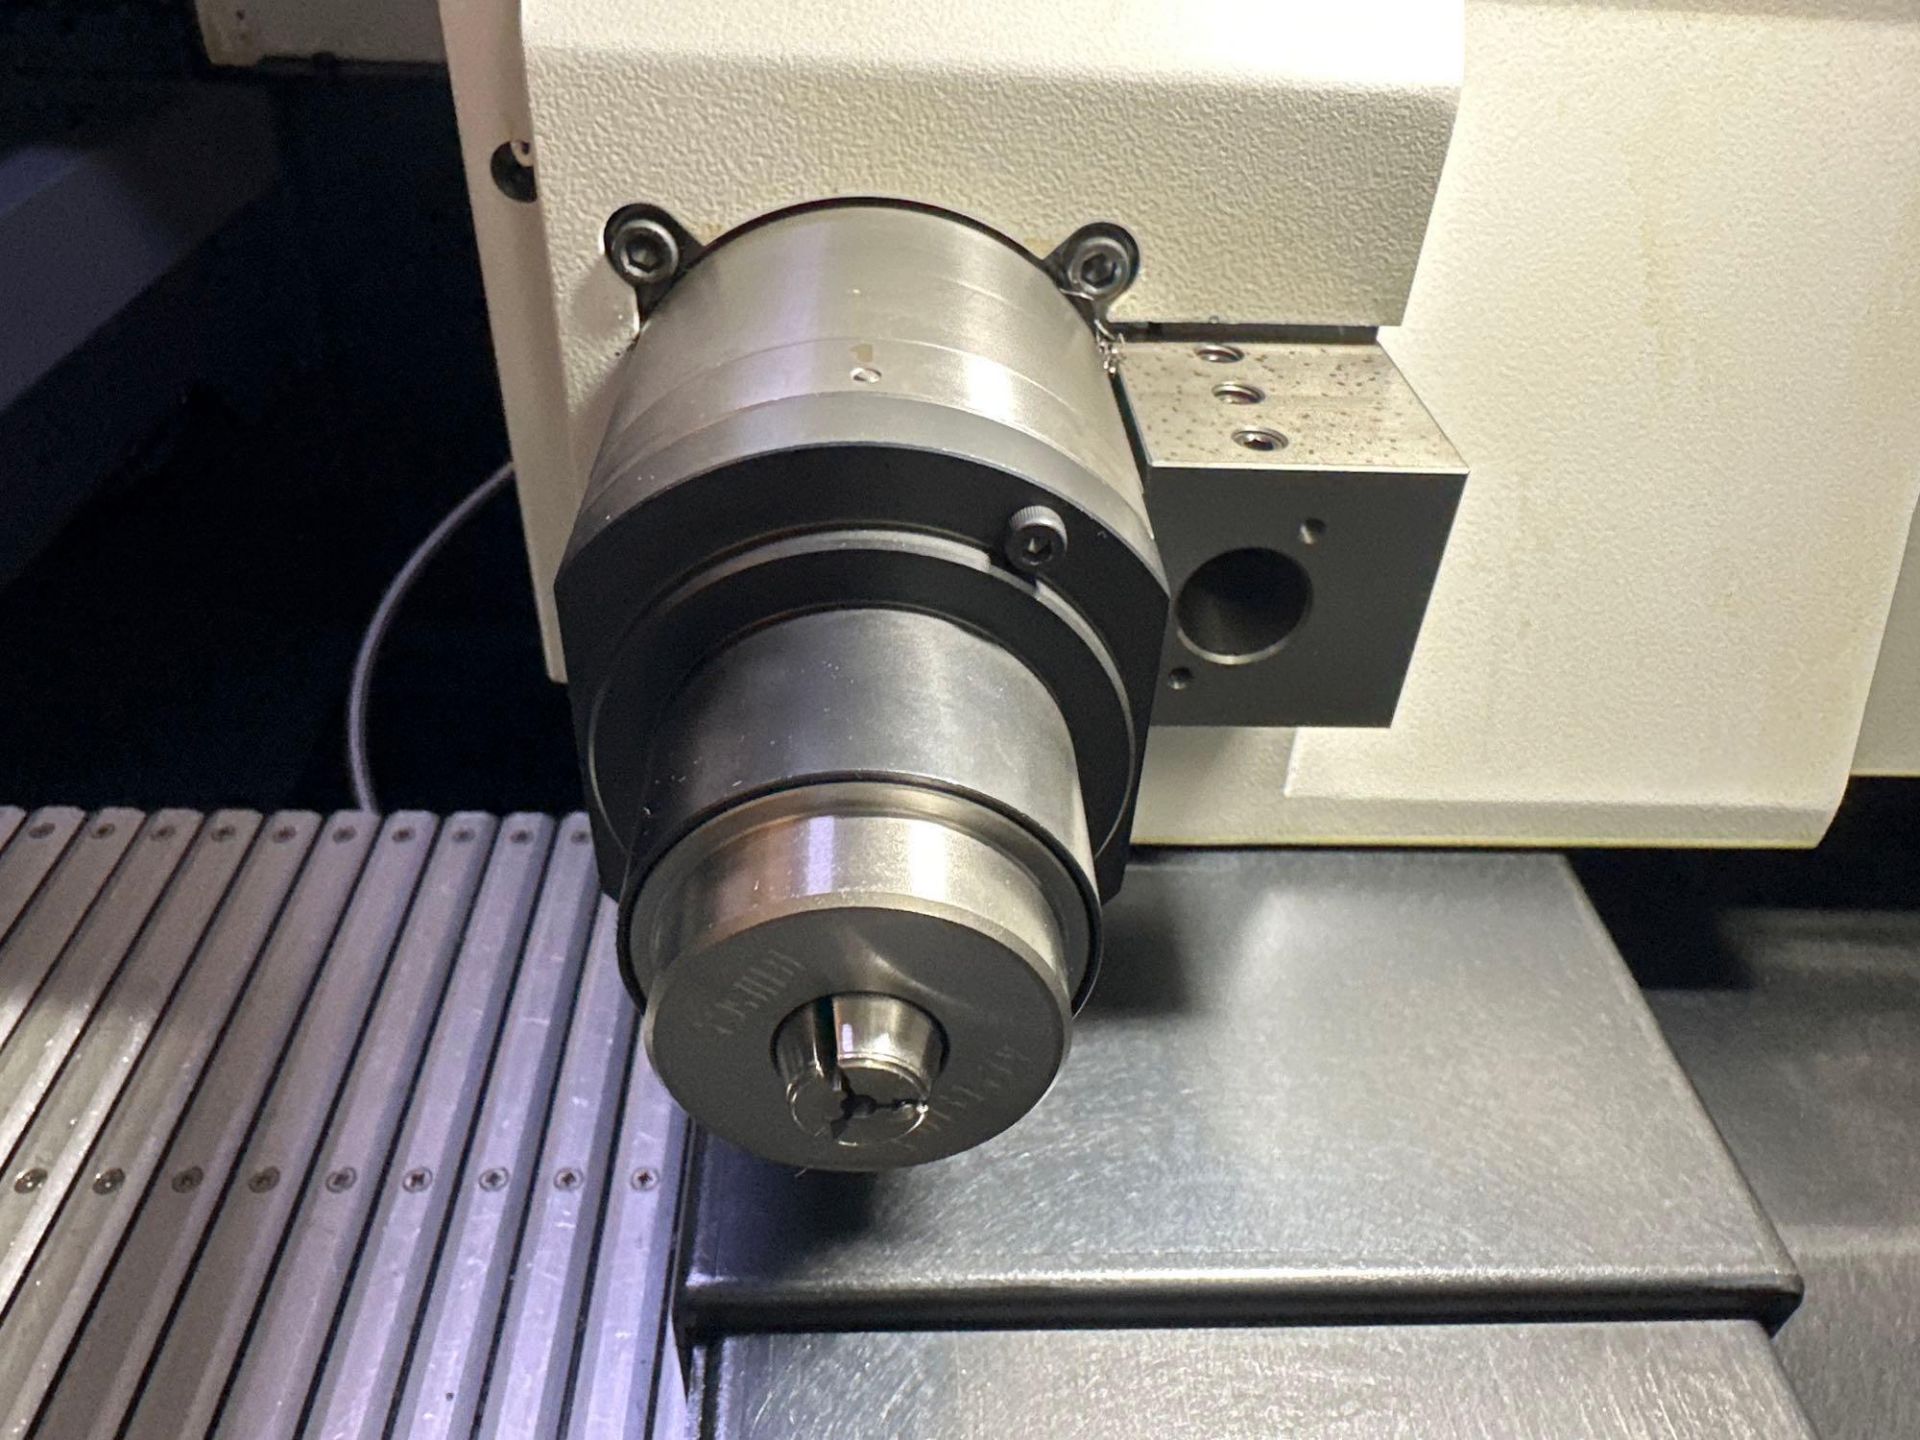 Citizen L12-1M7 6-Axis Swiss CNC Lathe, 18 Station Tool Holders *Delayed for sale in July* - Image 10 of 14